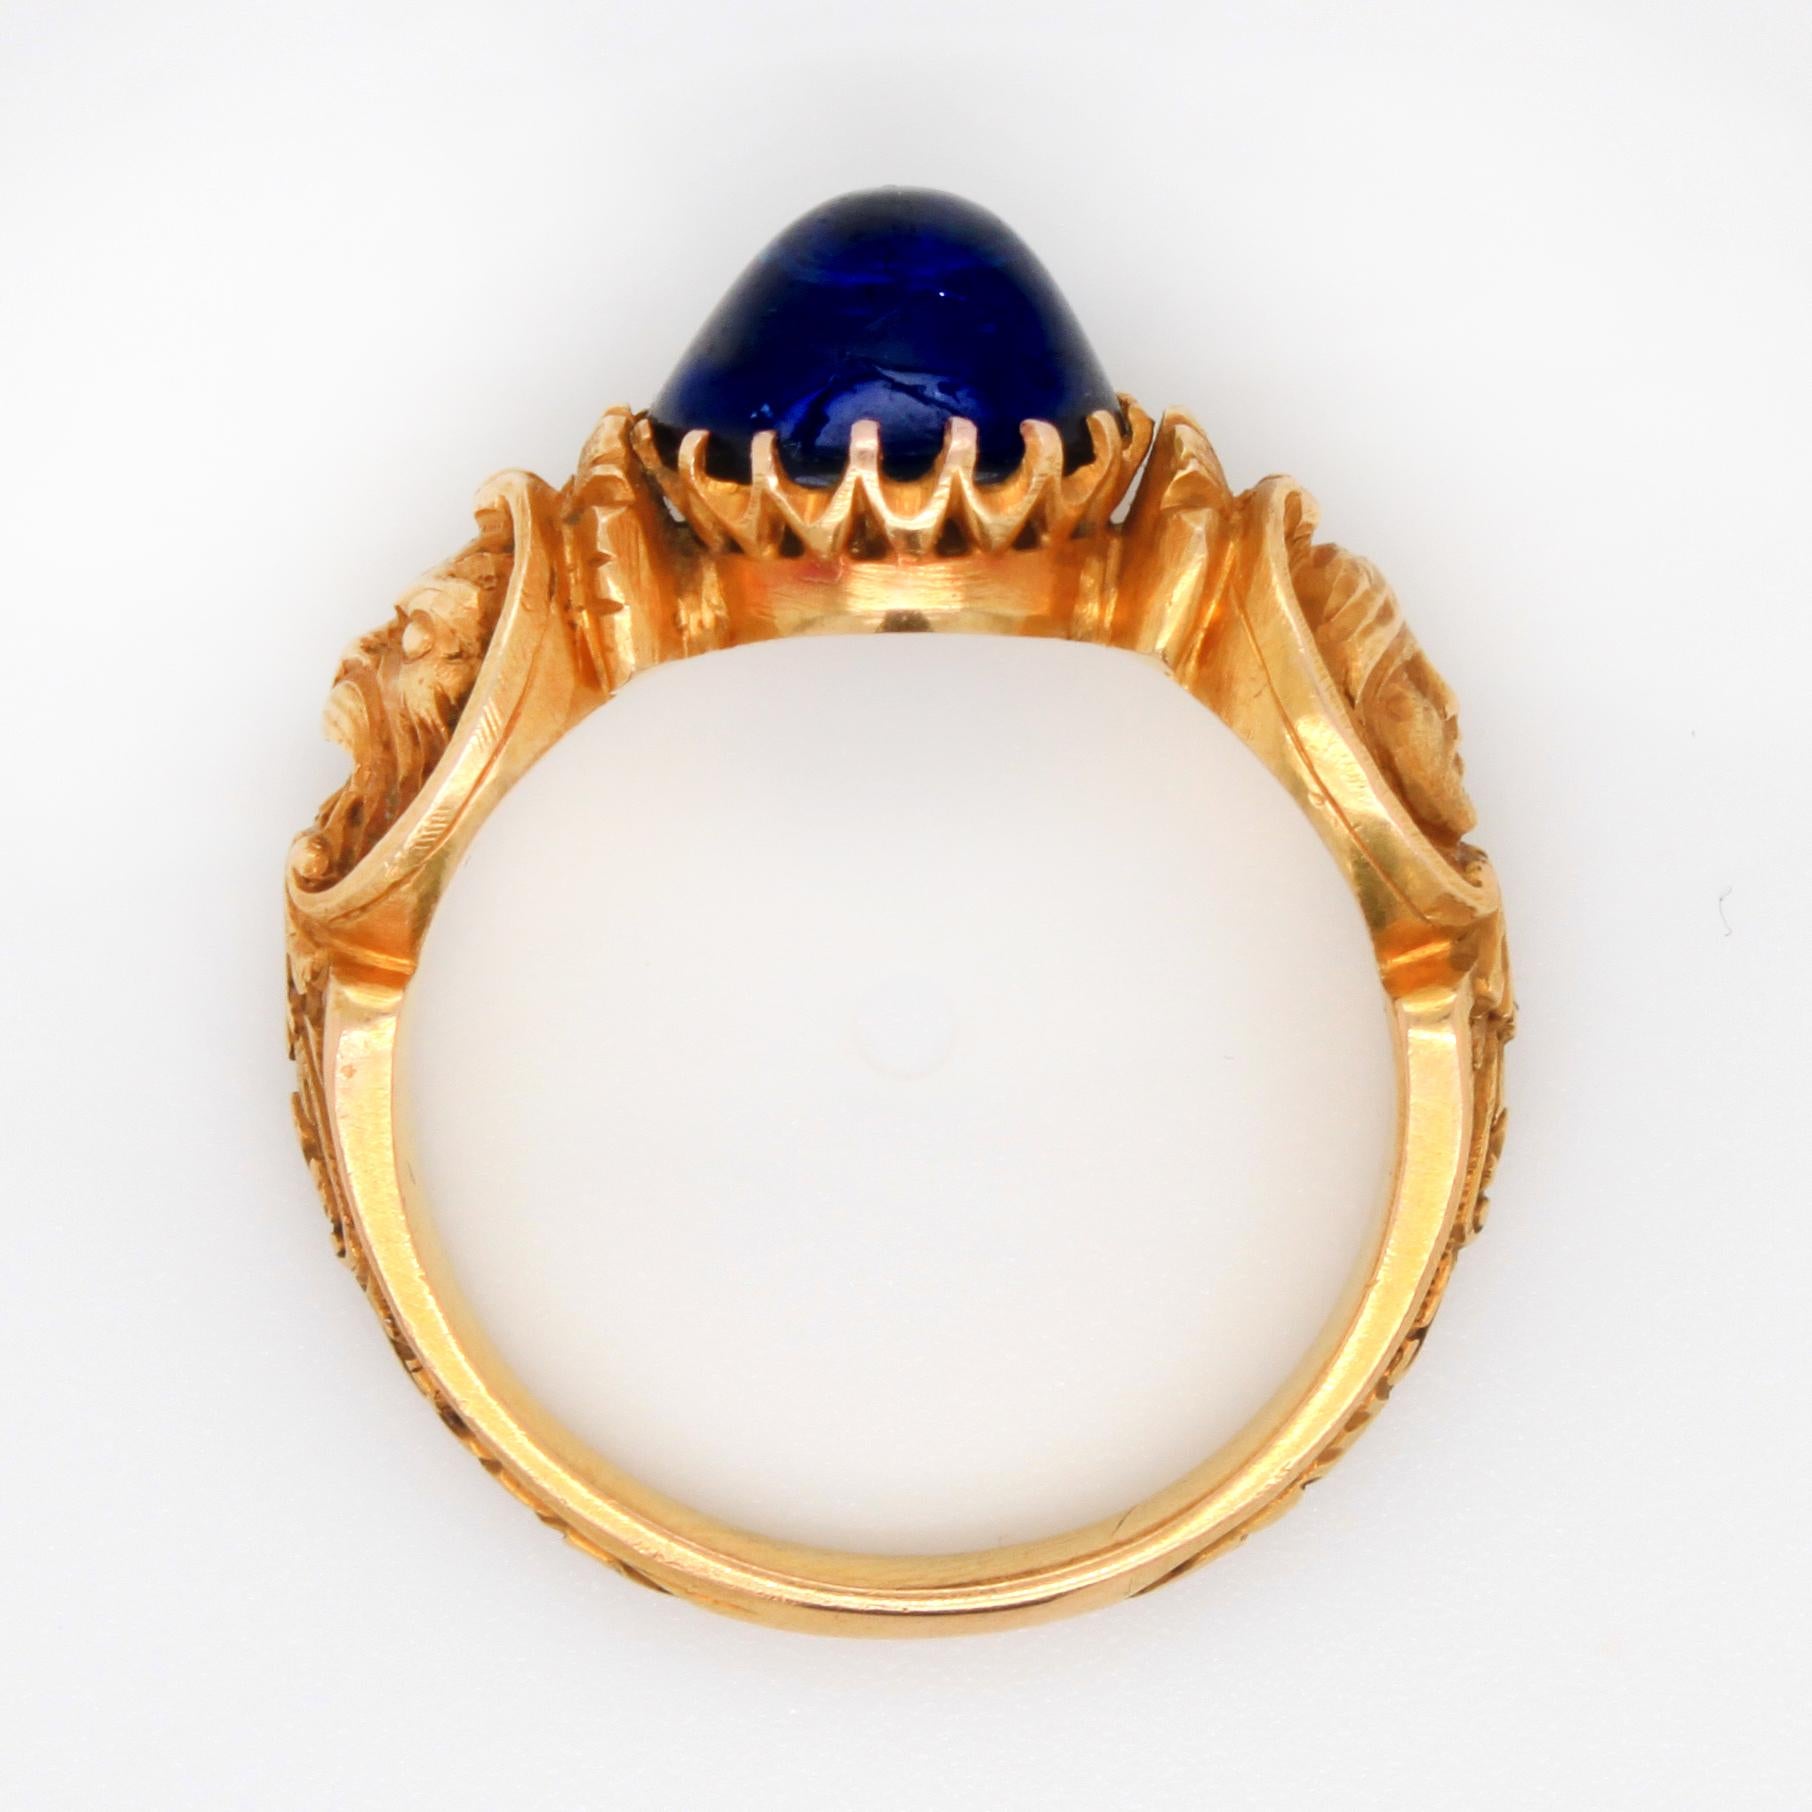 Renaissance Revival Sapphire and Gold Ring, circa 1840s 1